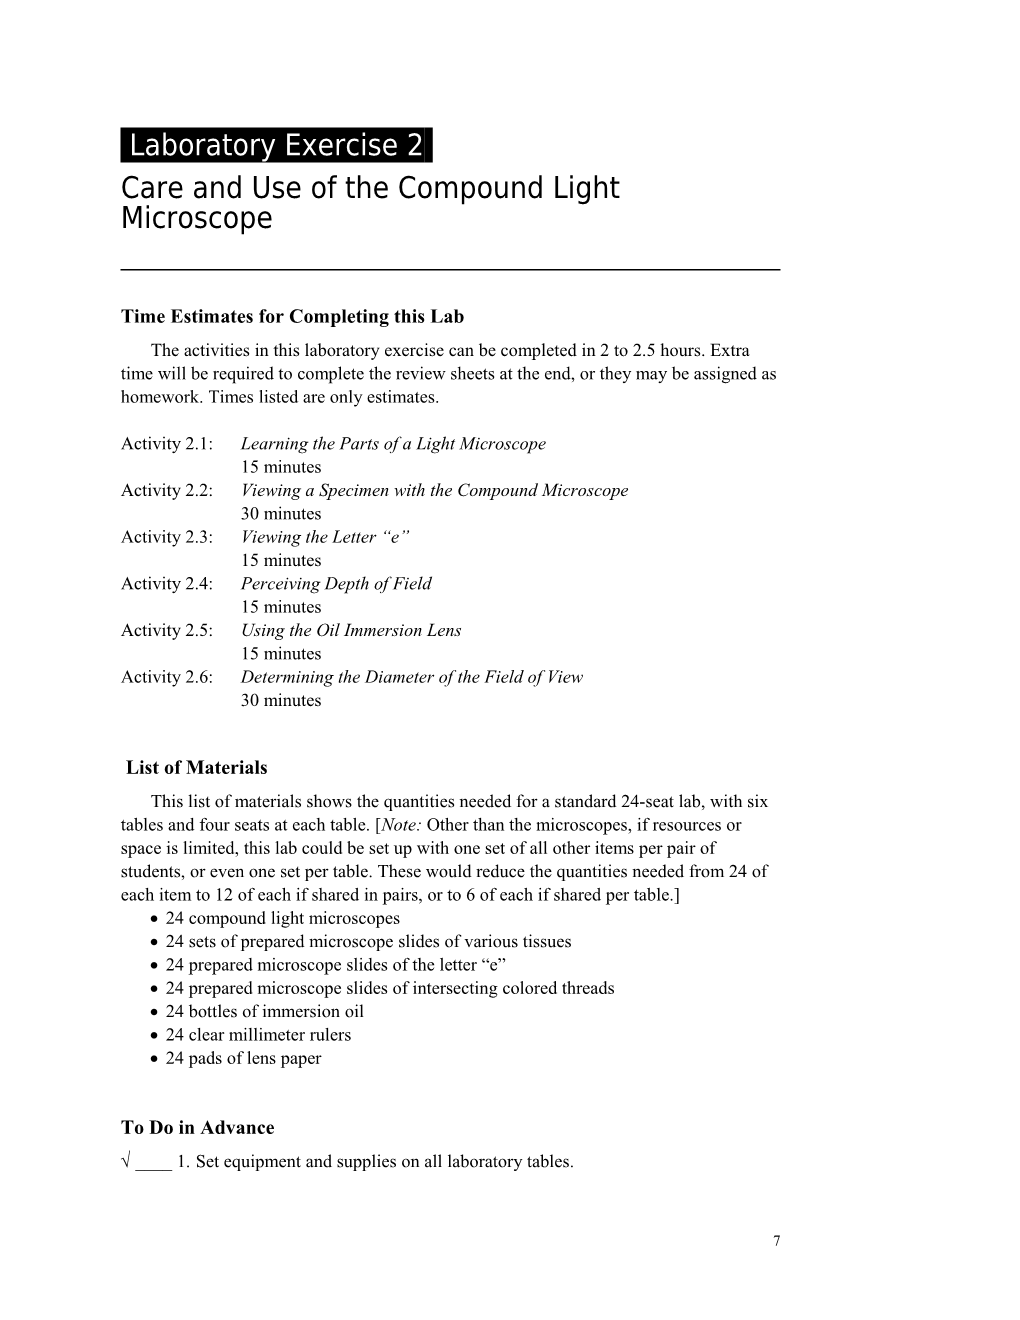 Care and Use of the Compound Light Microscope